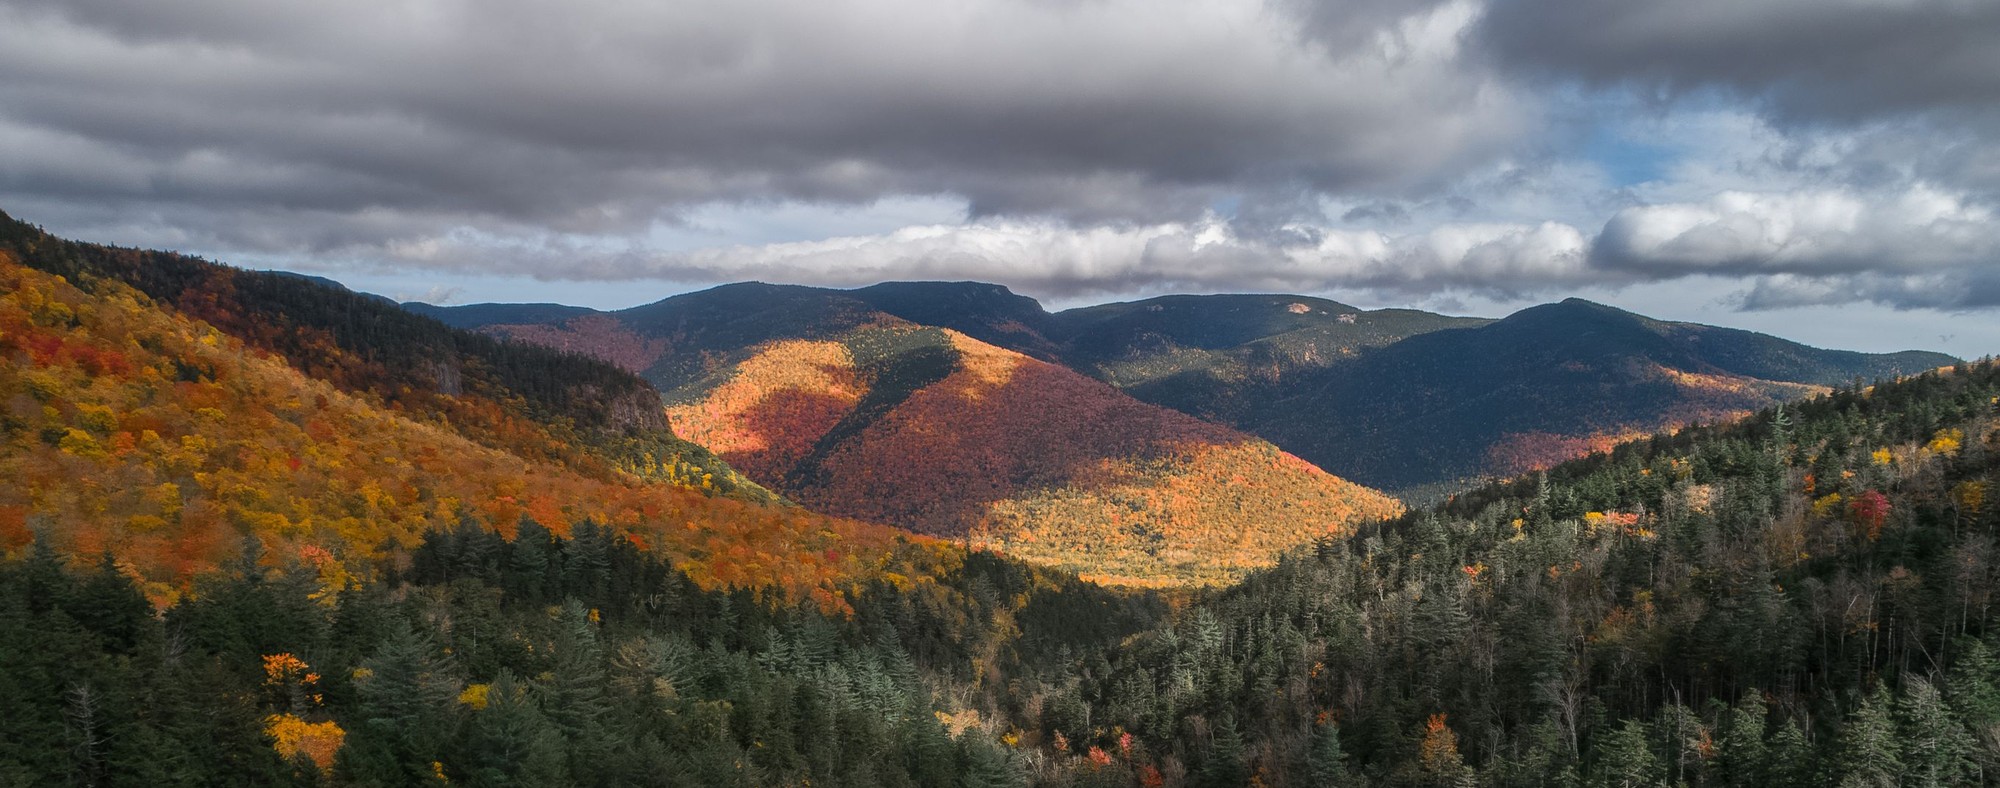 The upper valley in New England during fall